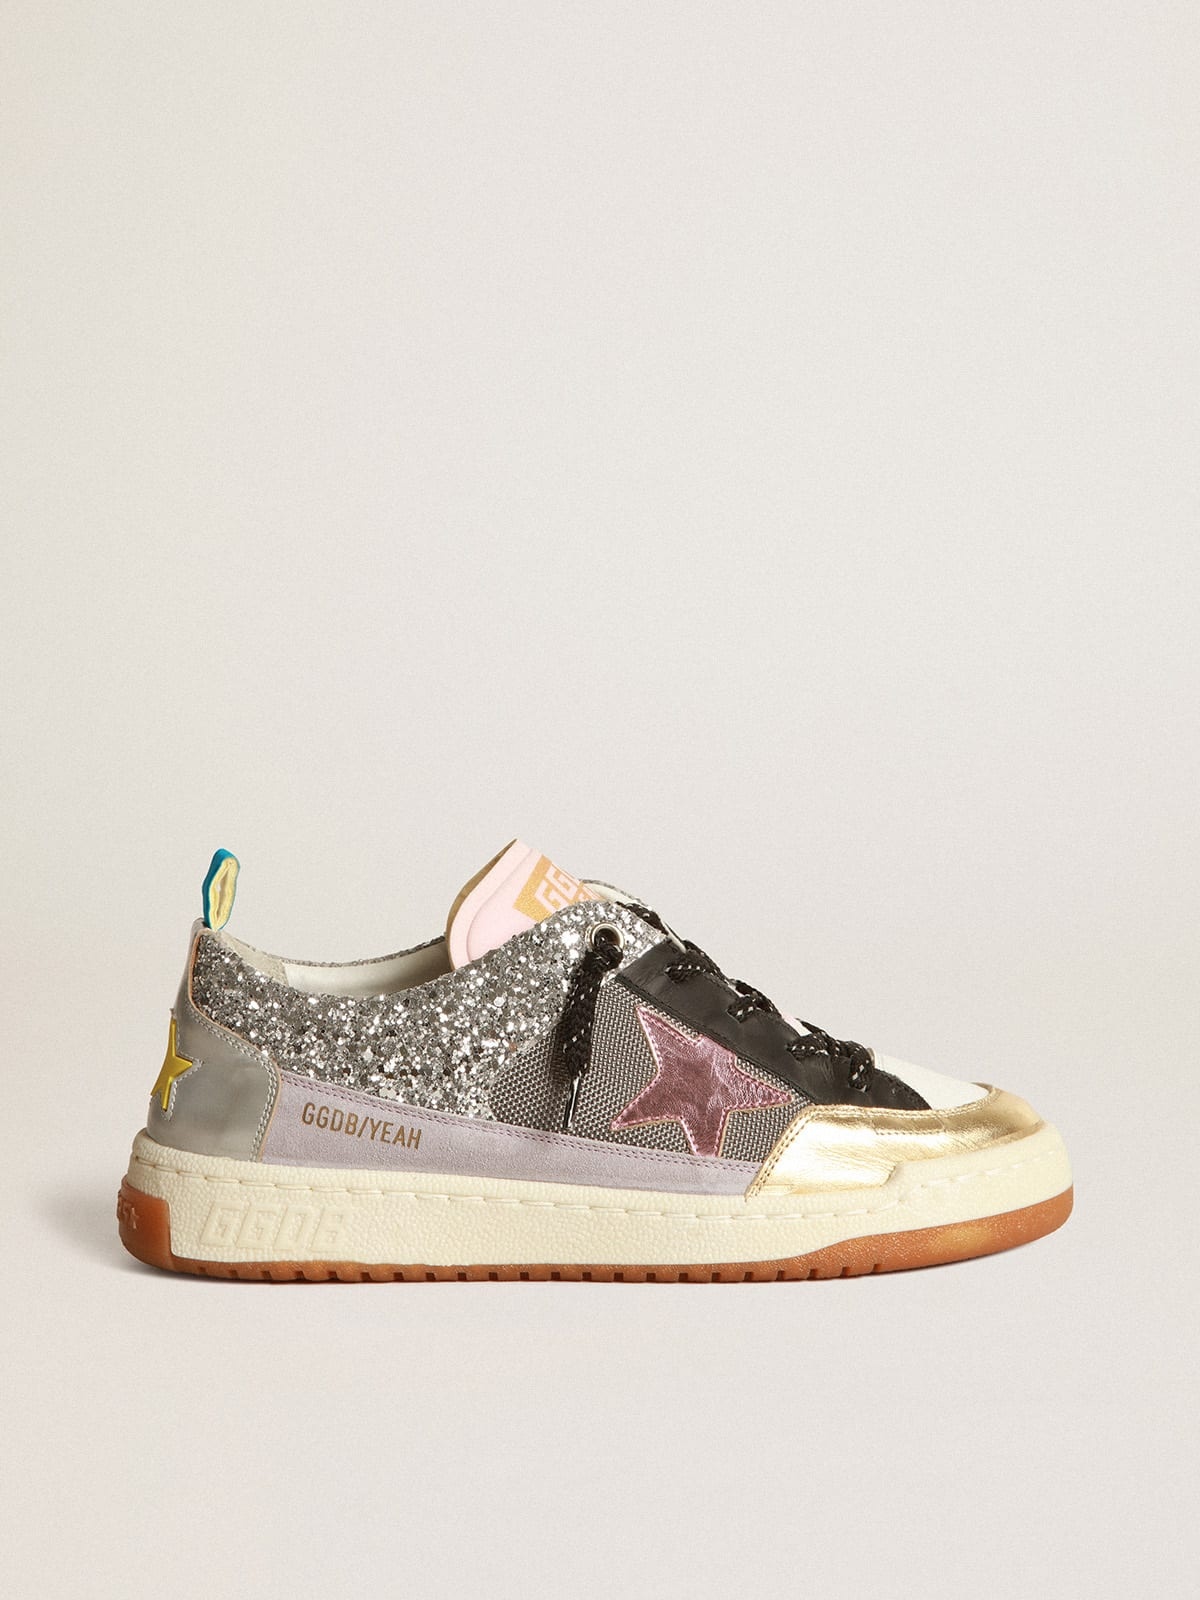 Golden Goose Yeah! sneakers in silver mesh with a pink star | REVERSIBLE